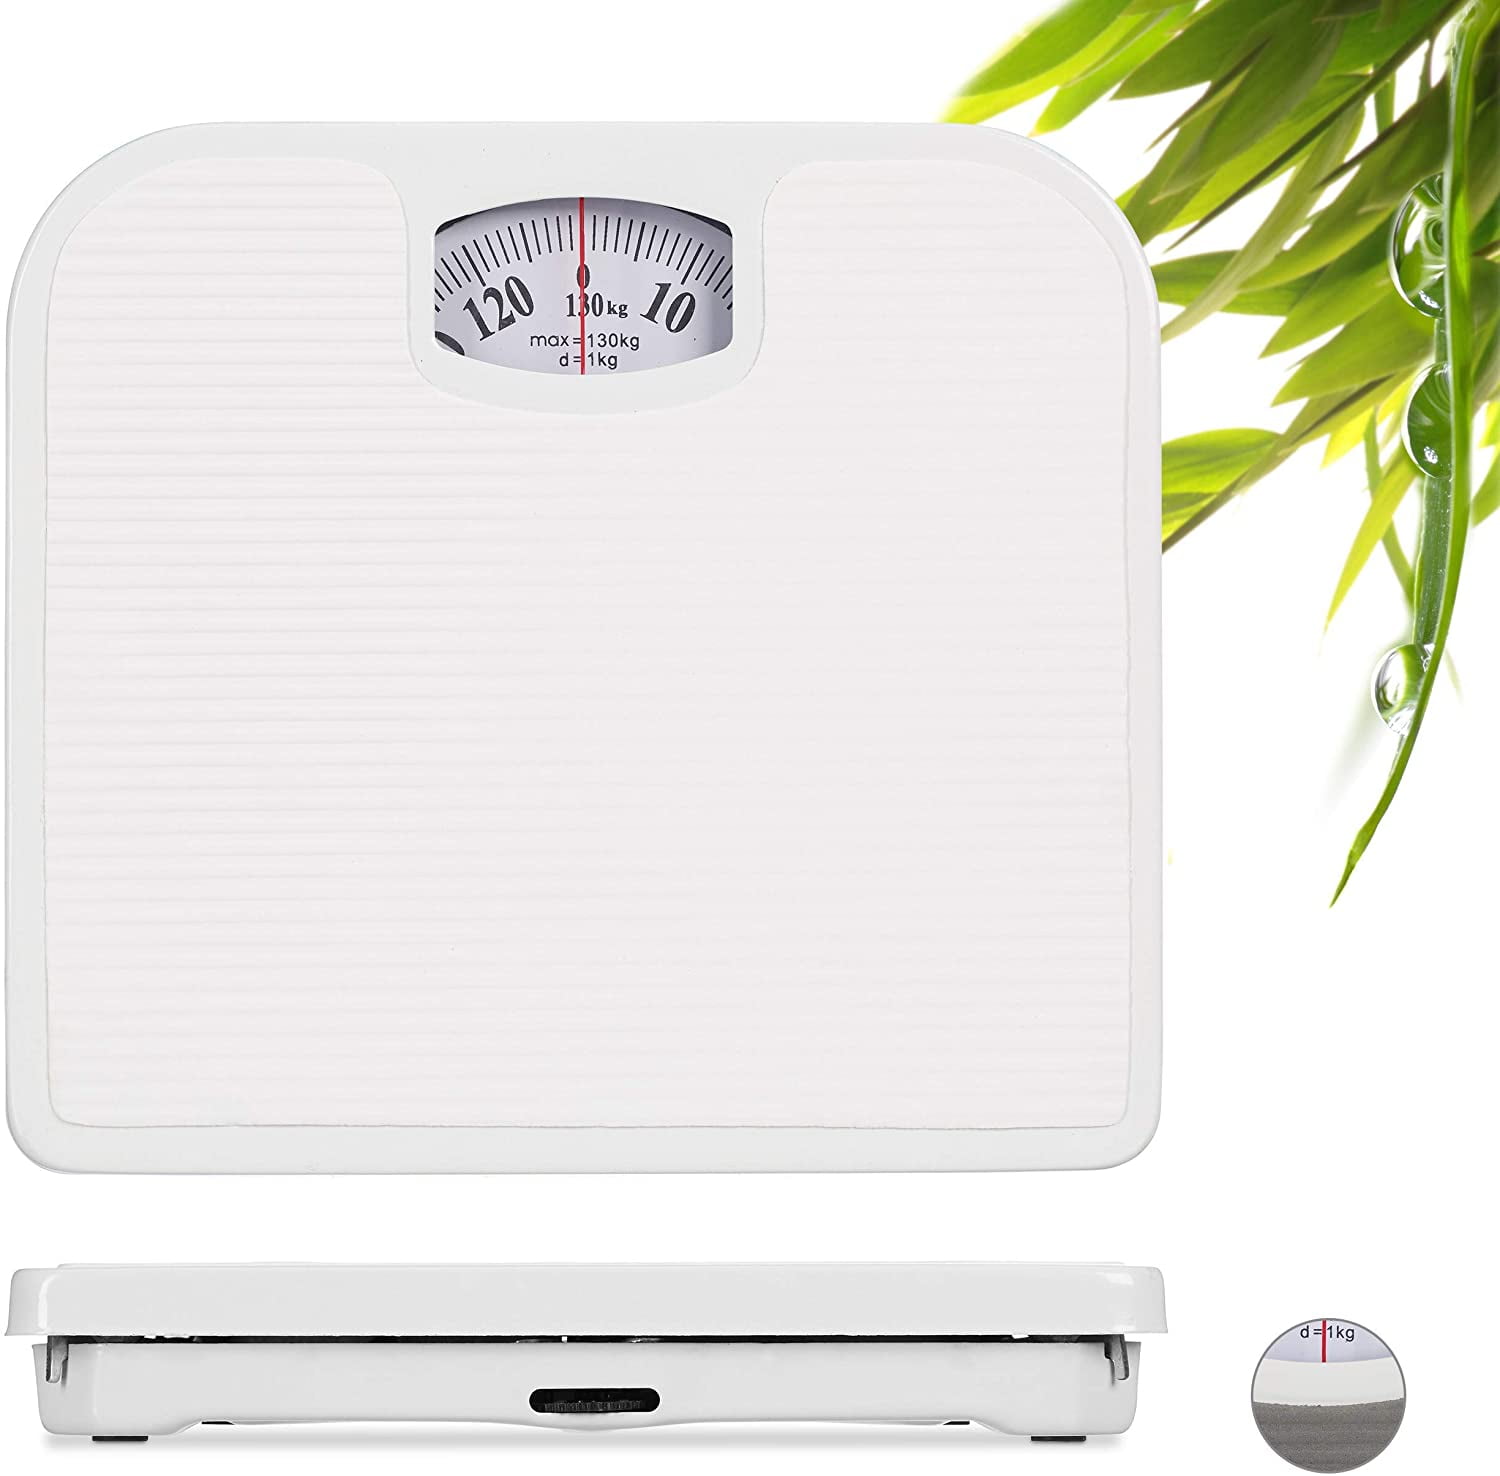 GLASS LCD DIGITAL ELECTRONIC 130KG LB WEIGHING BODY SCALES BATHROOM  Clear 